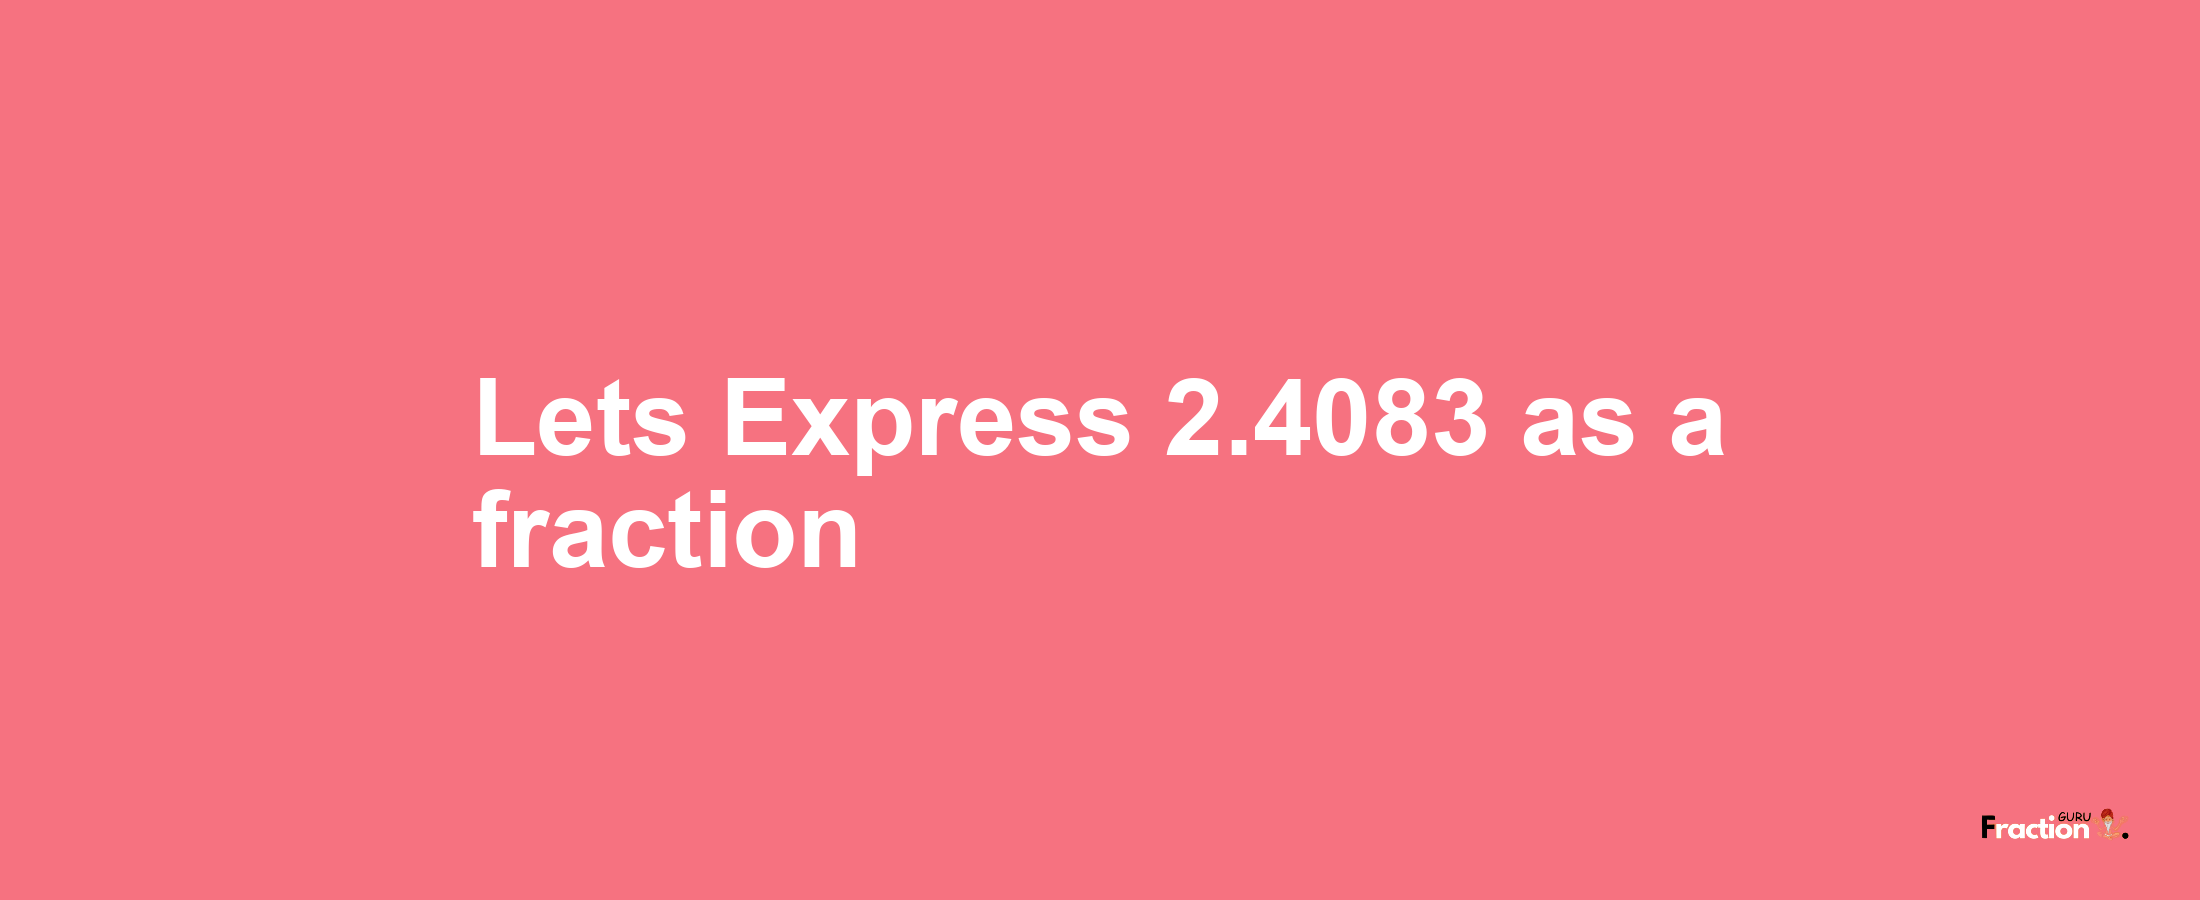 Lets Express 2.4083 as afraction